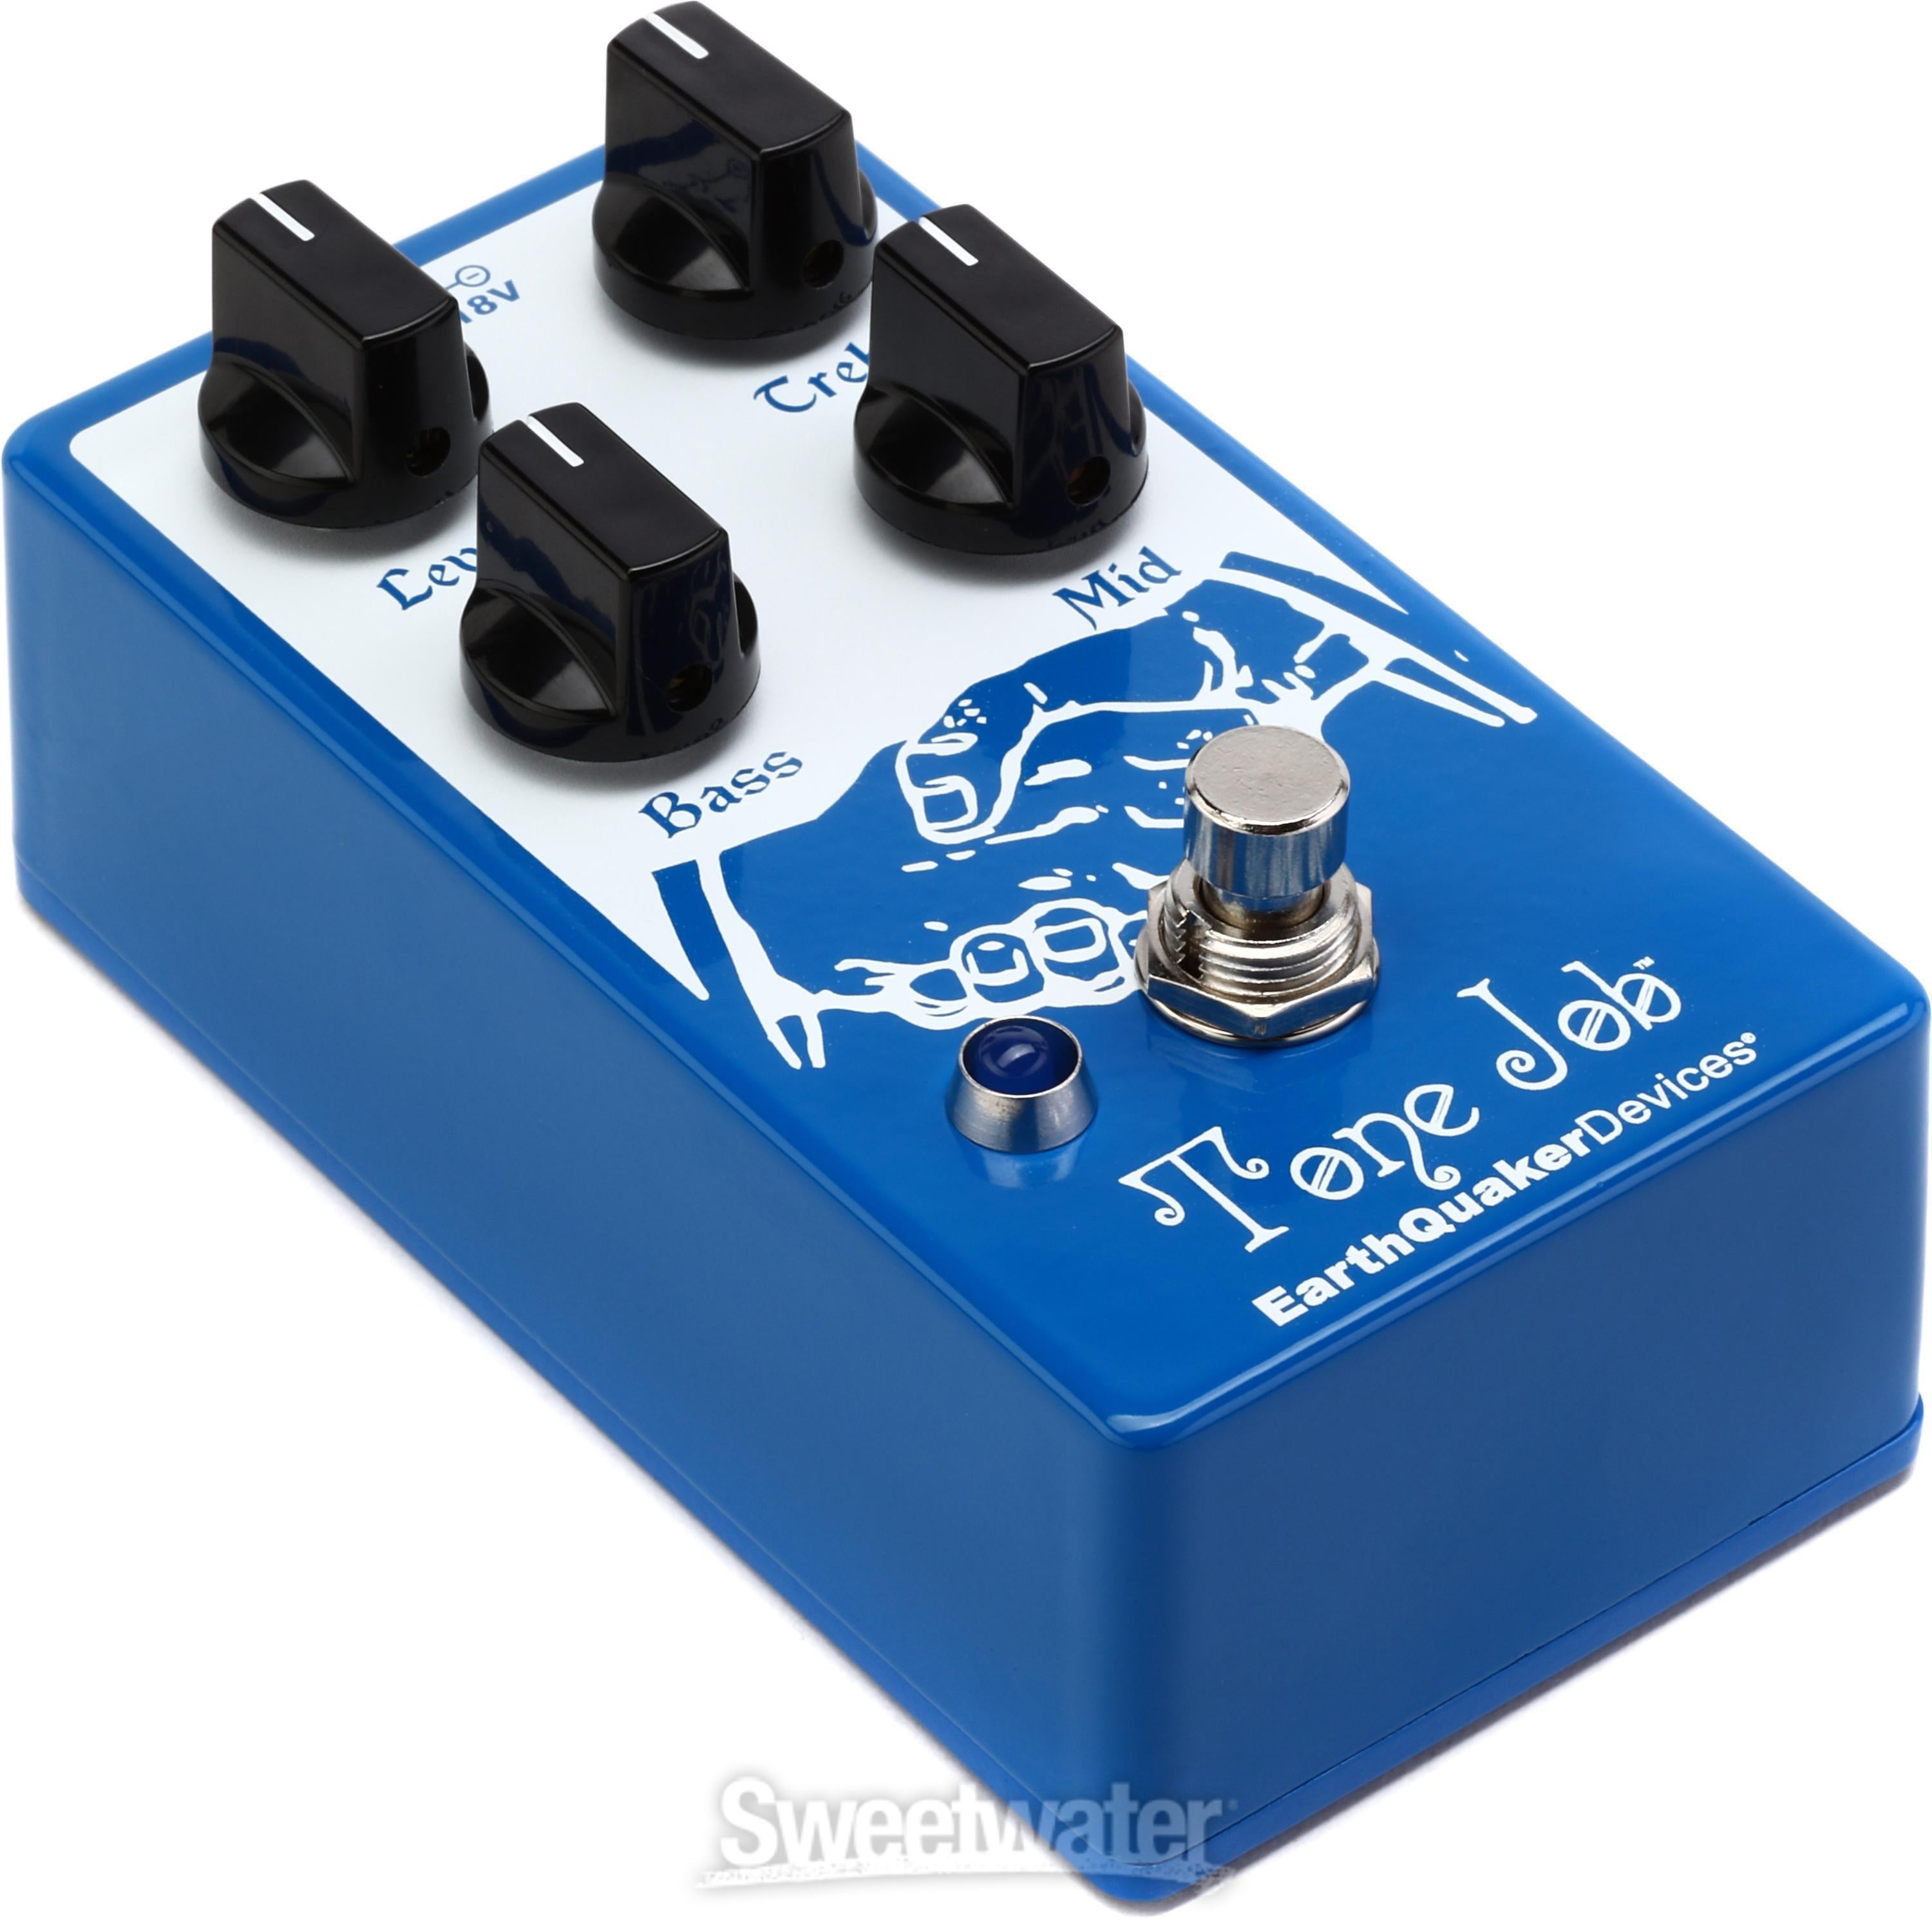 EarthQuaker　Tone　Boost　and　PayPayモール　Job　イコライザー　EQ　通販　ブースター　ギターエフェクター　再入荷新品】　Devices